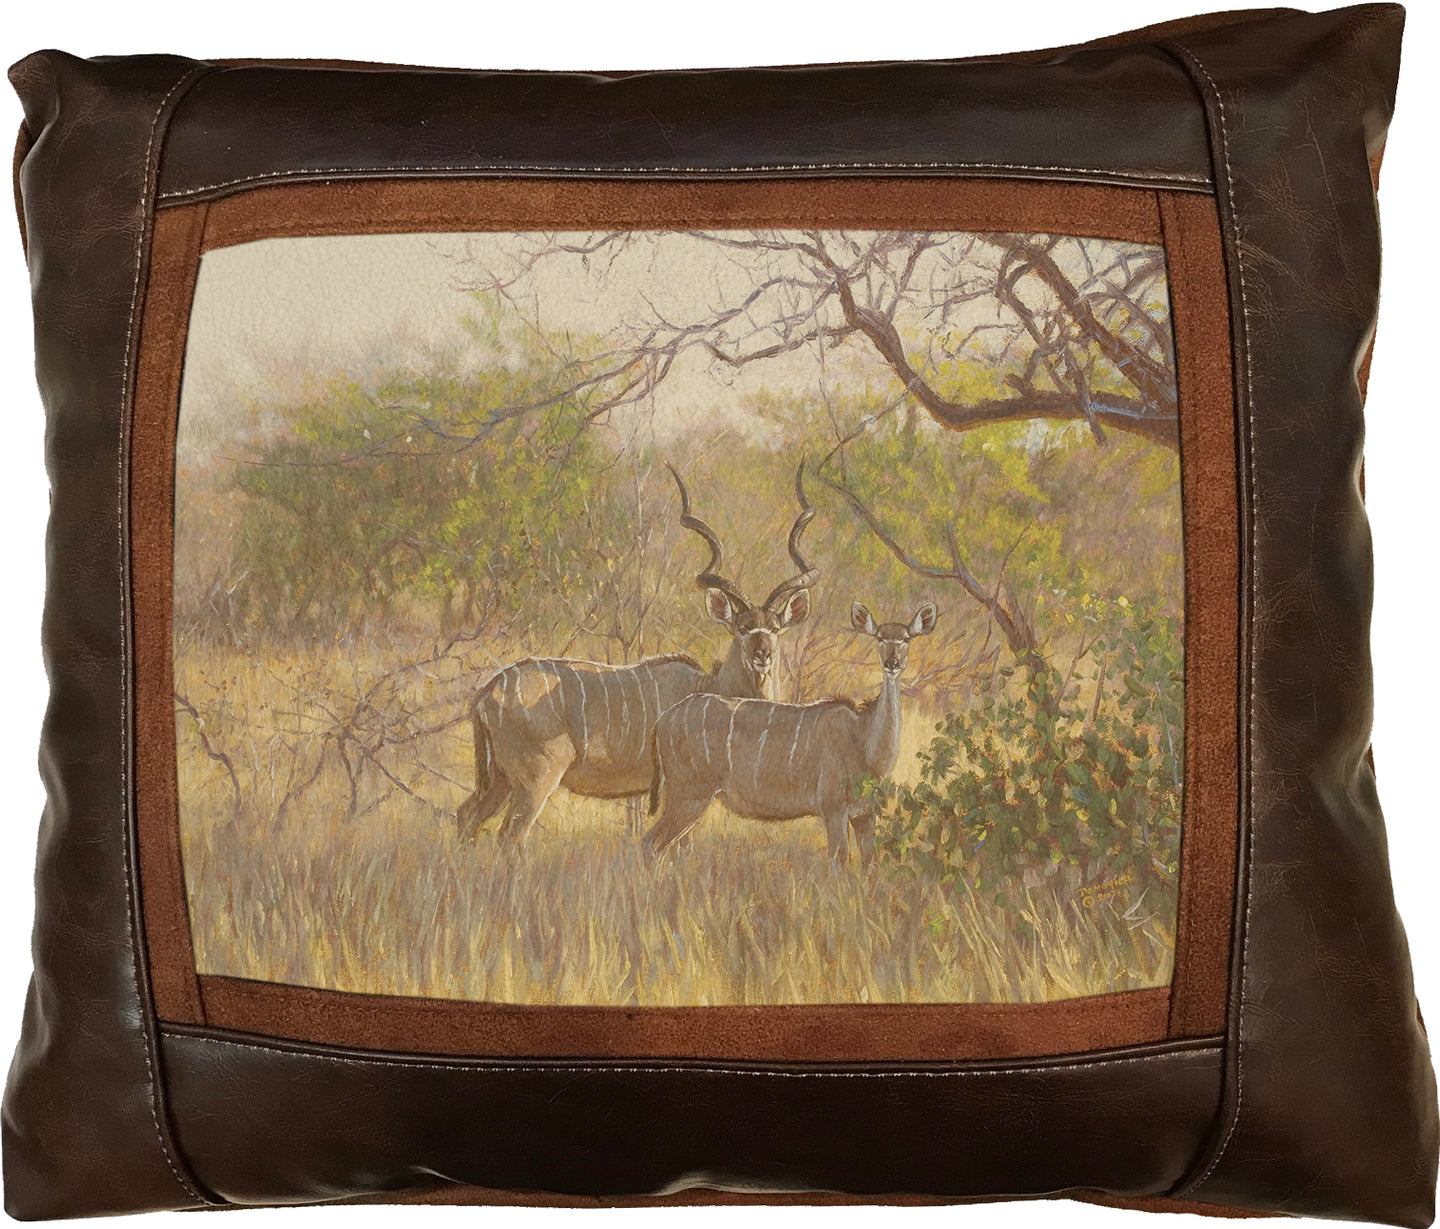 Banovich Wild Accents-Kudu in the Lowveld-Leather Pillow